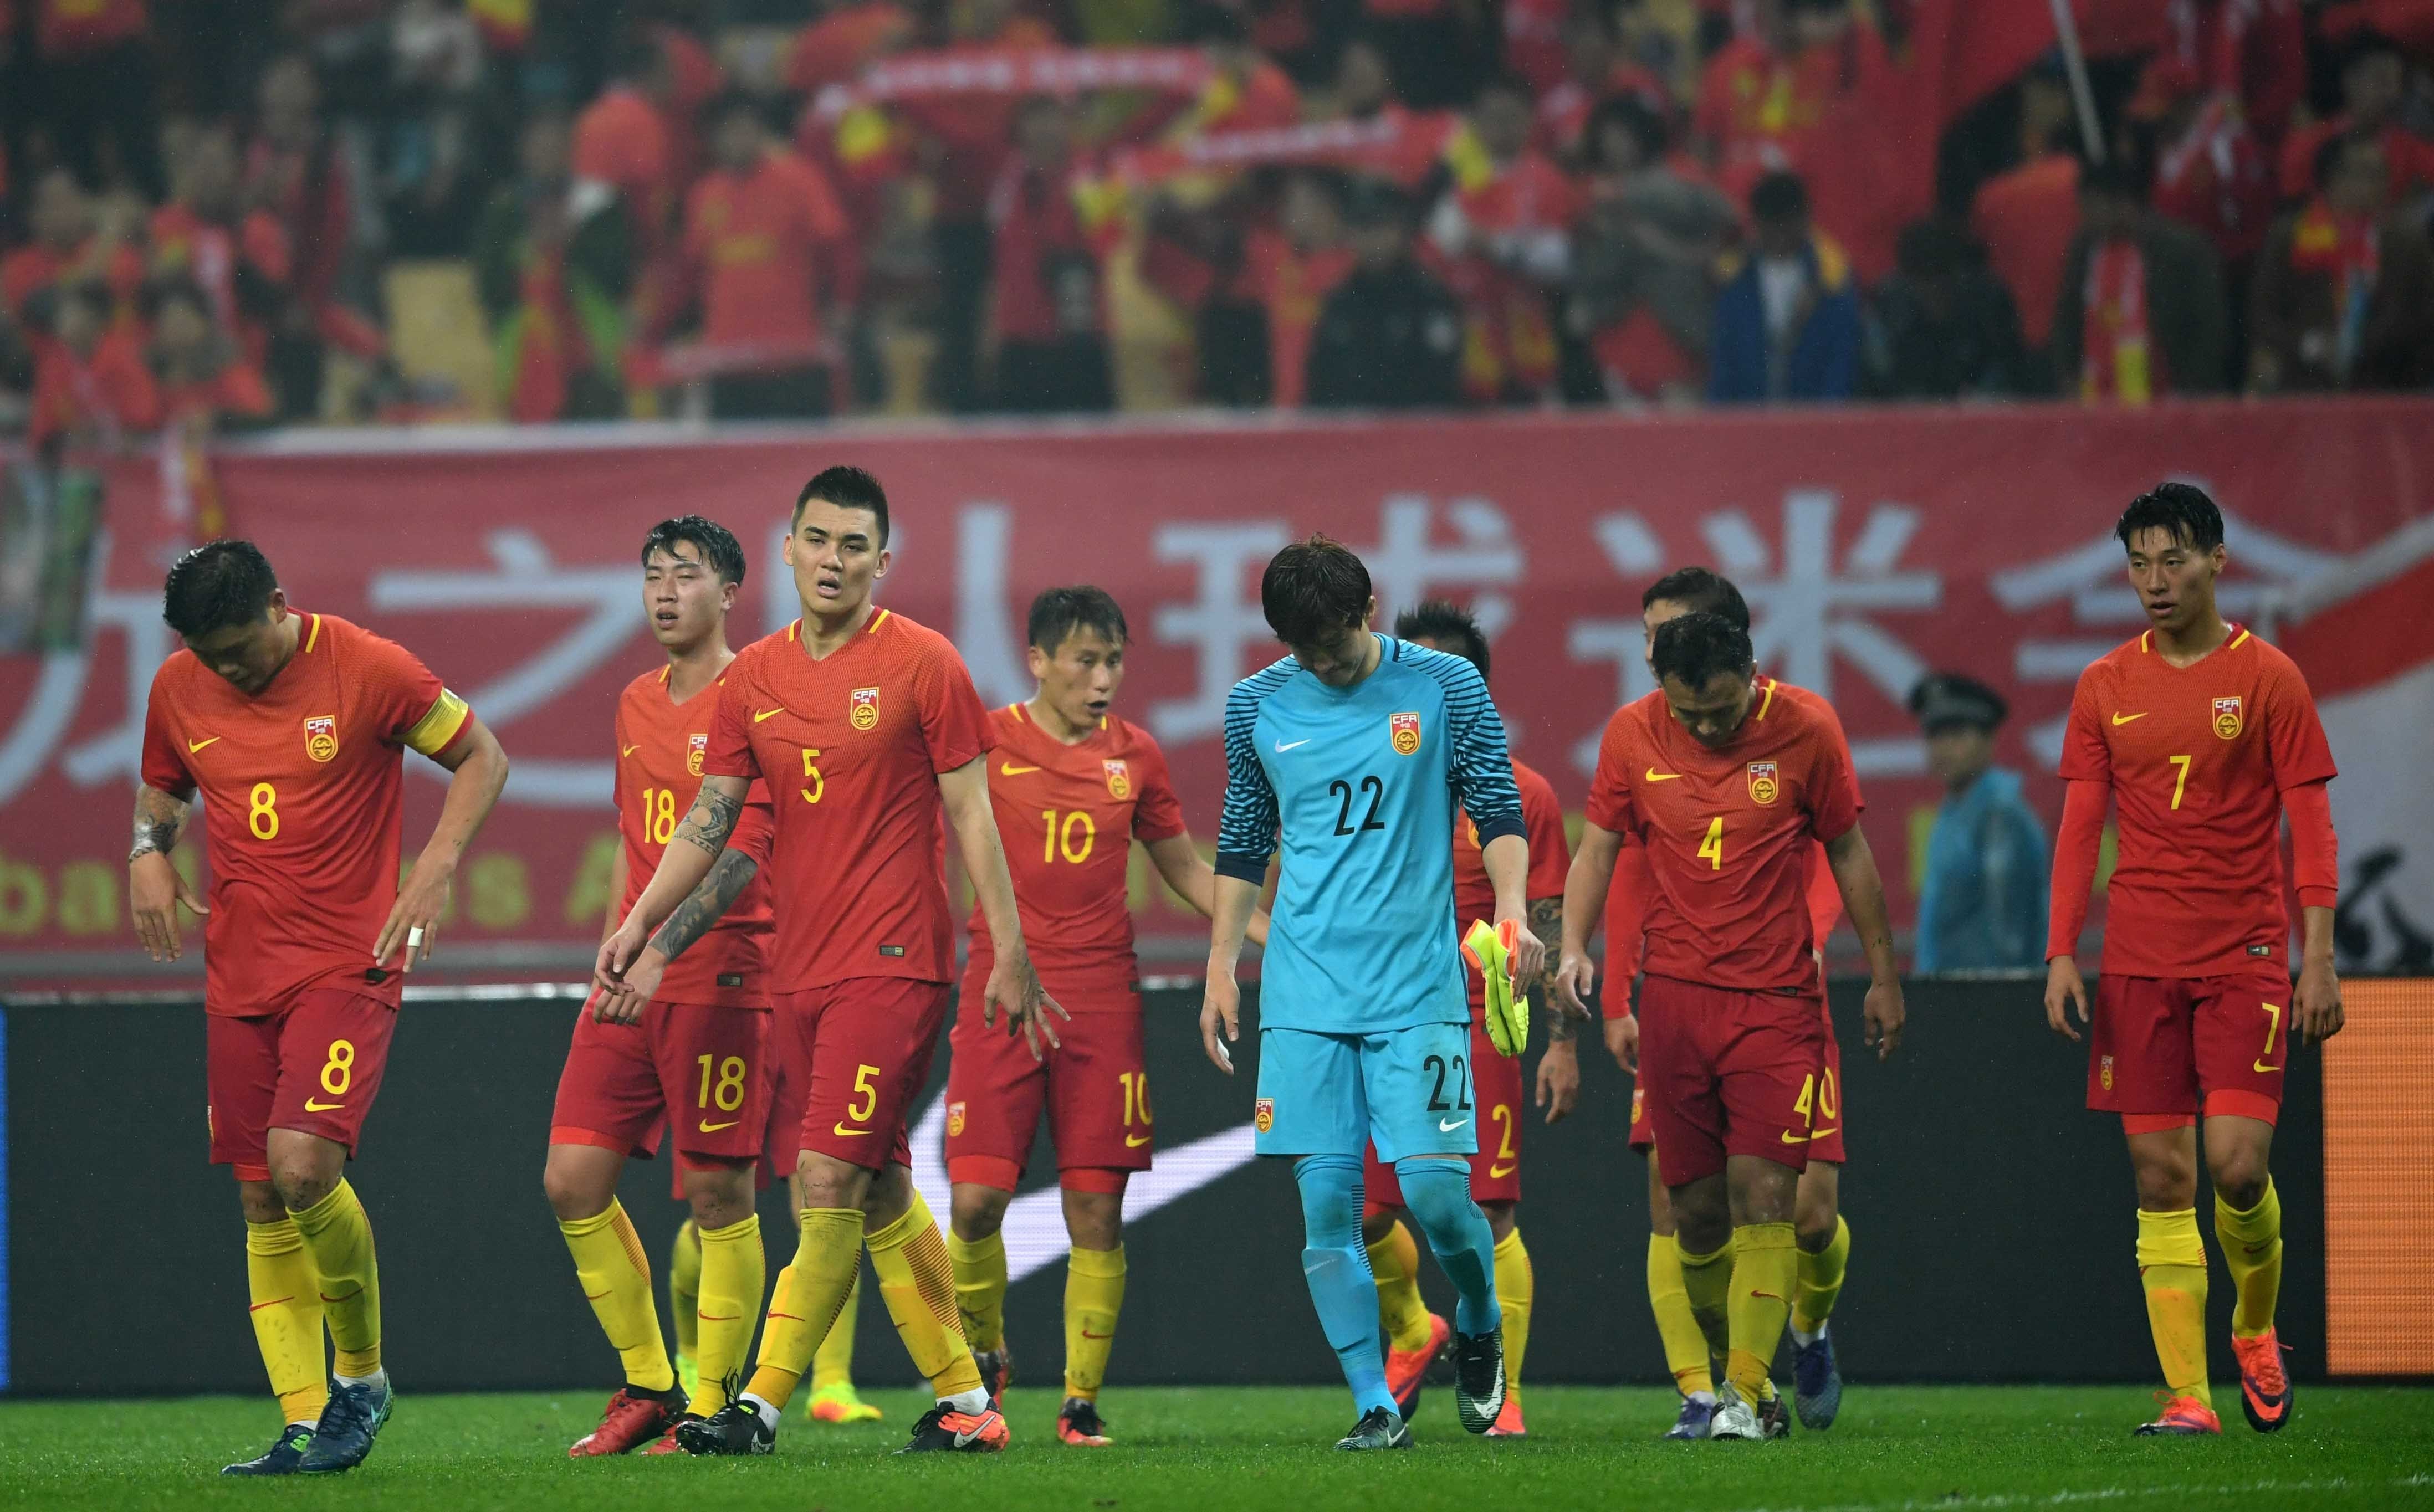 Despite the country building world-class infrastructure and employing some of the best foreign coaches, China’s footballers have yet to become world beaters, with players born under the one-child policy lacking cooperation skills